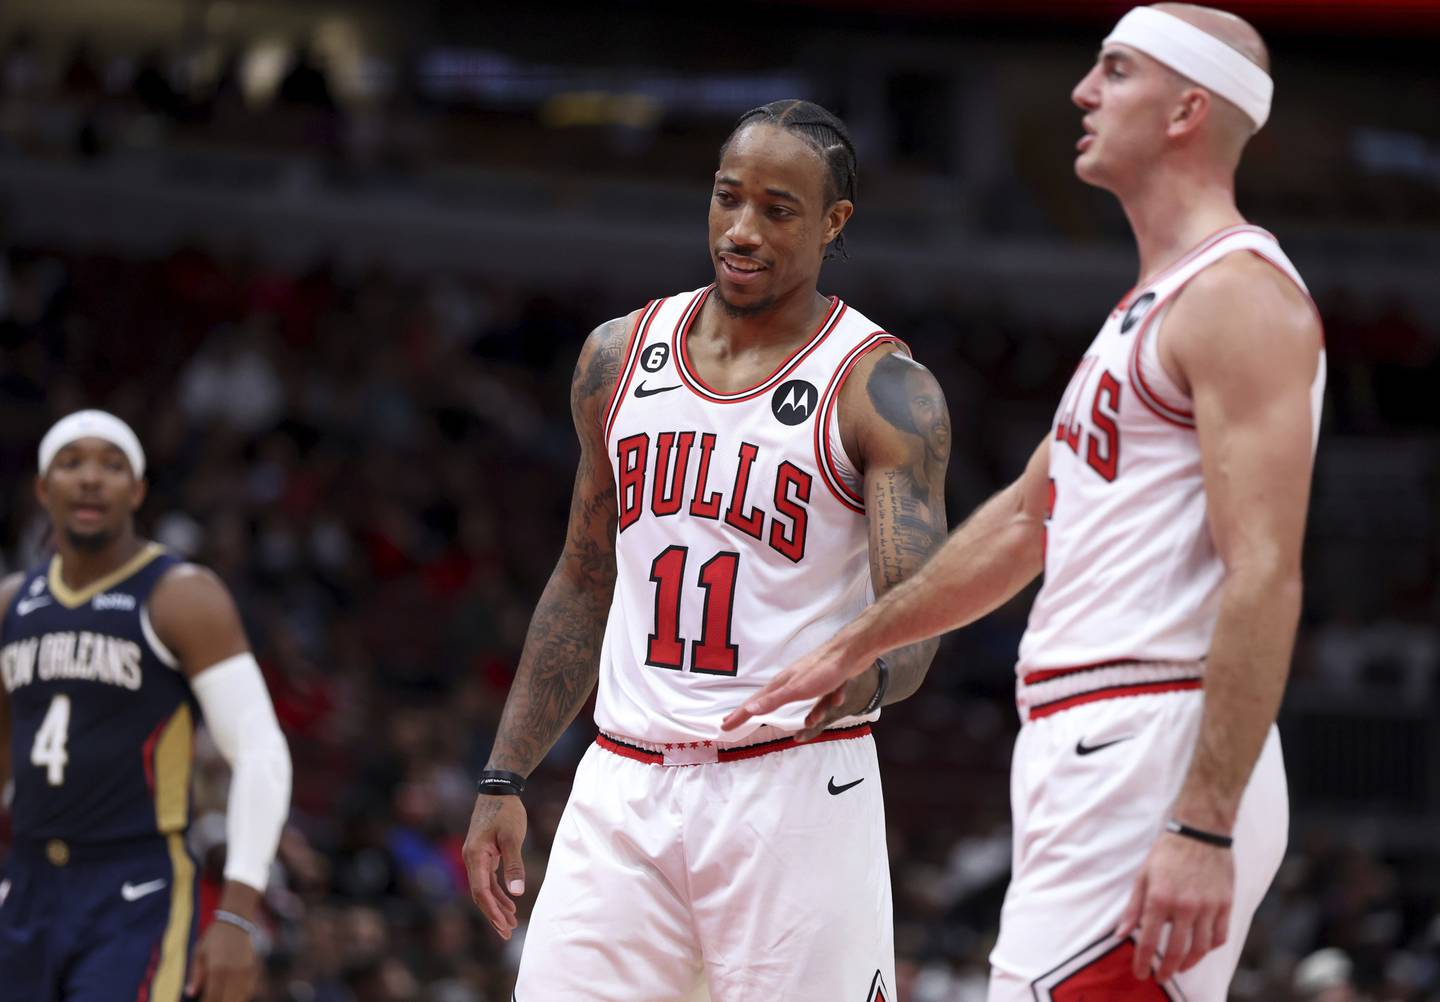 Bulls forward DeMar DeRozan and guard Alex Caruso high-five in the second half of a preseason game against the Pelicans at the United Center on Oct. 4, 2022.